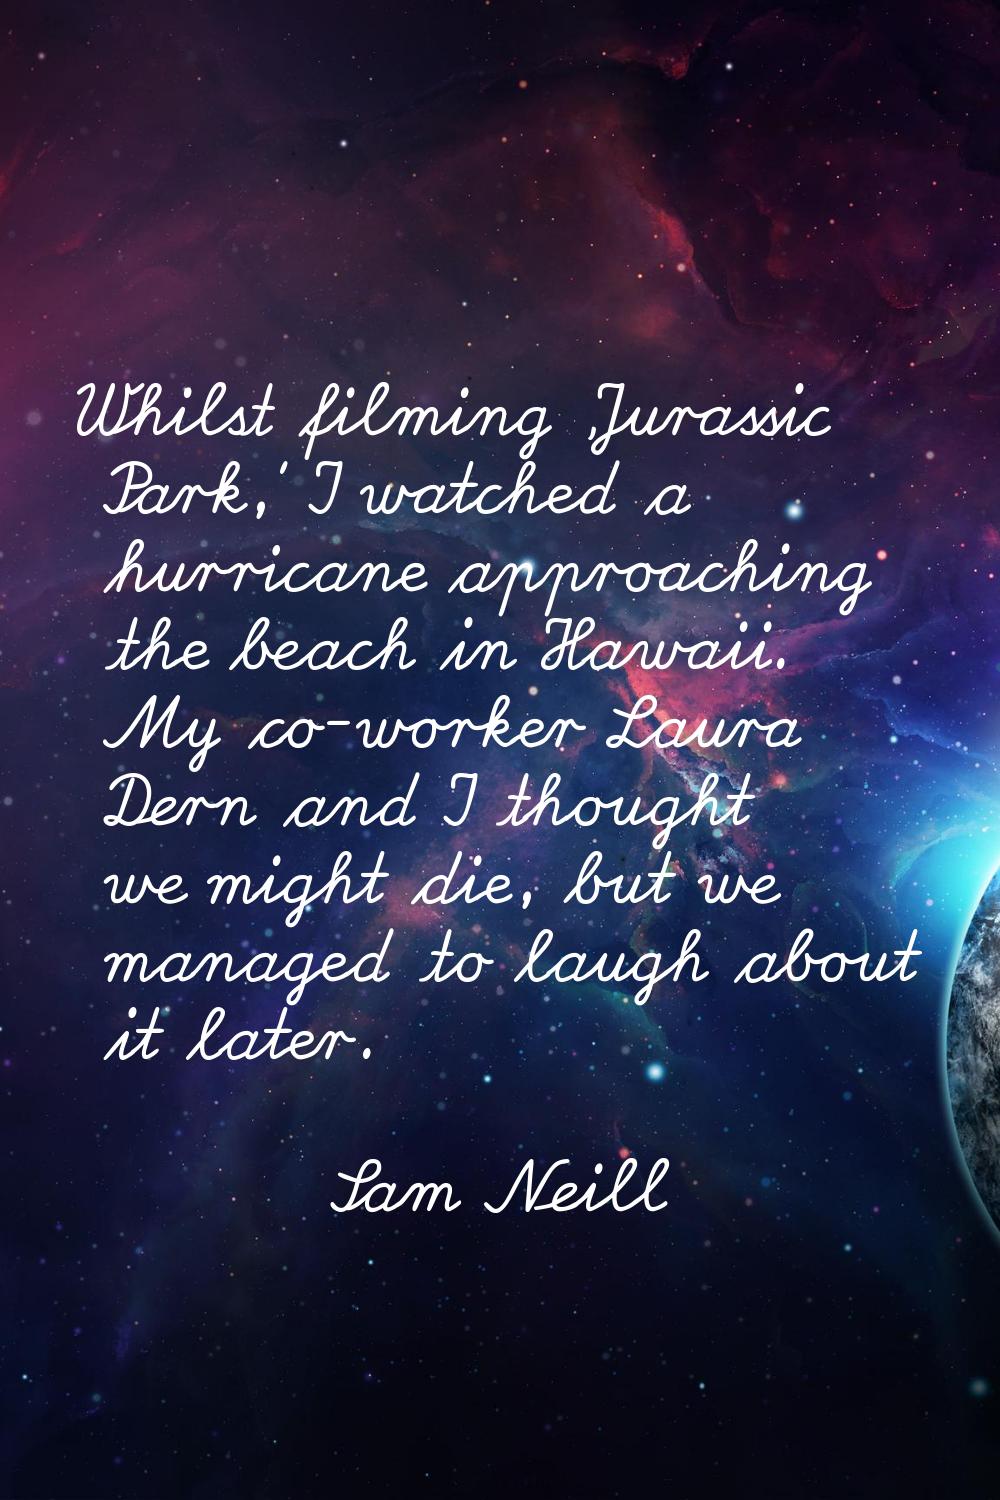 Whilst filming 'Jurassic Park,' I watched a hurricane approaching the beach in Hawaii. My co-worker